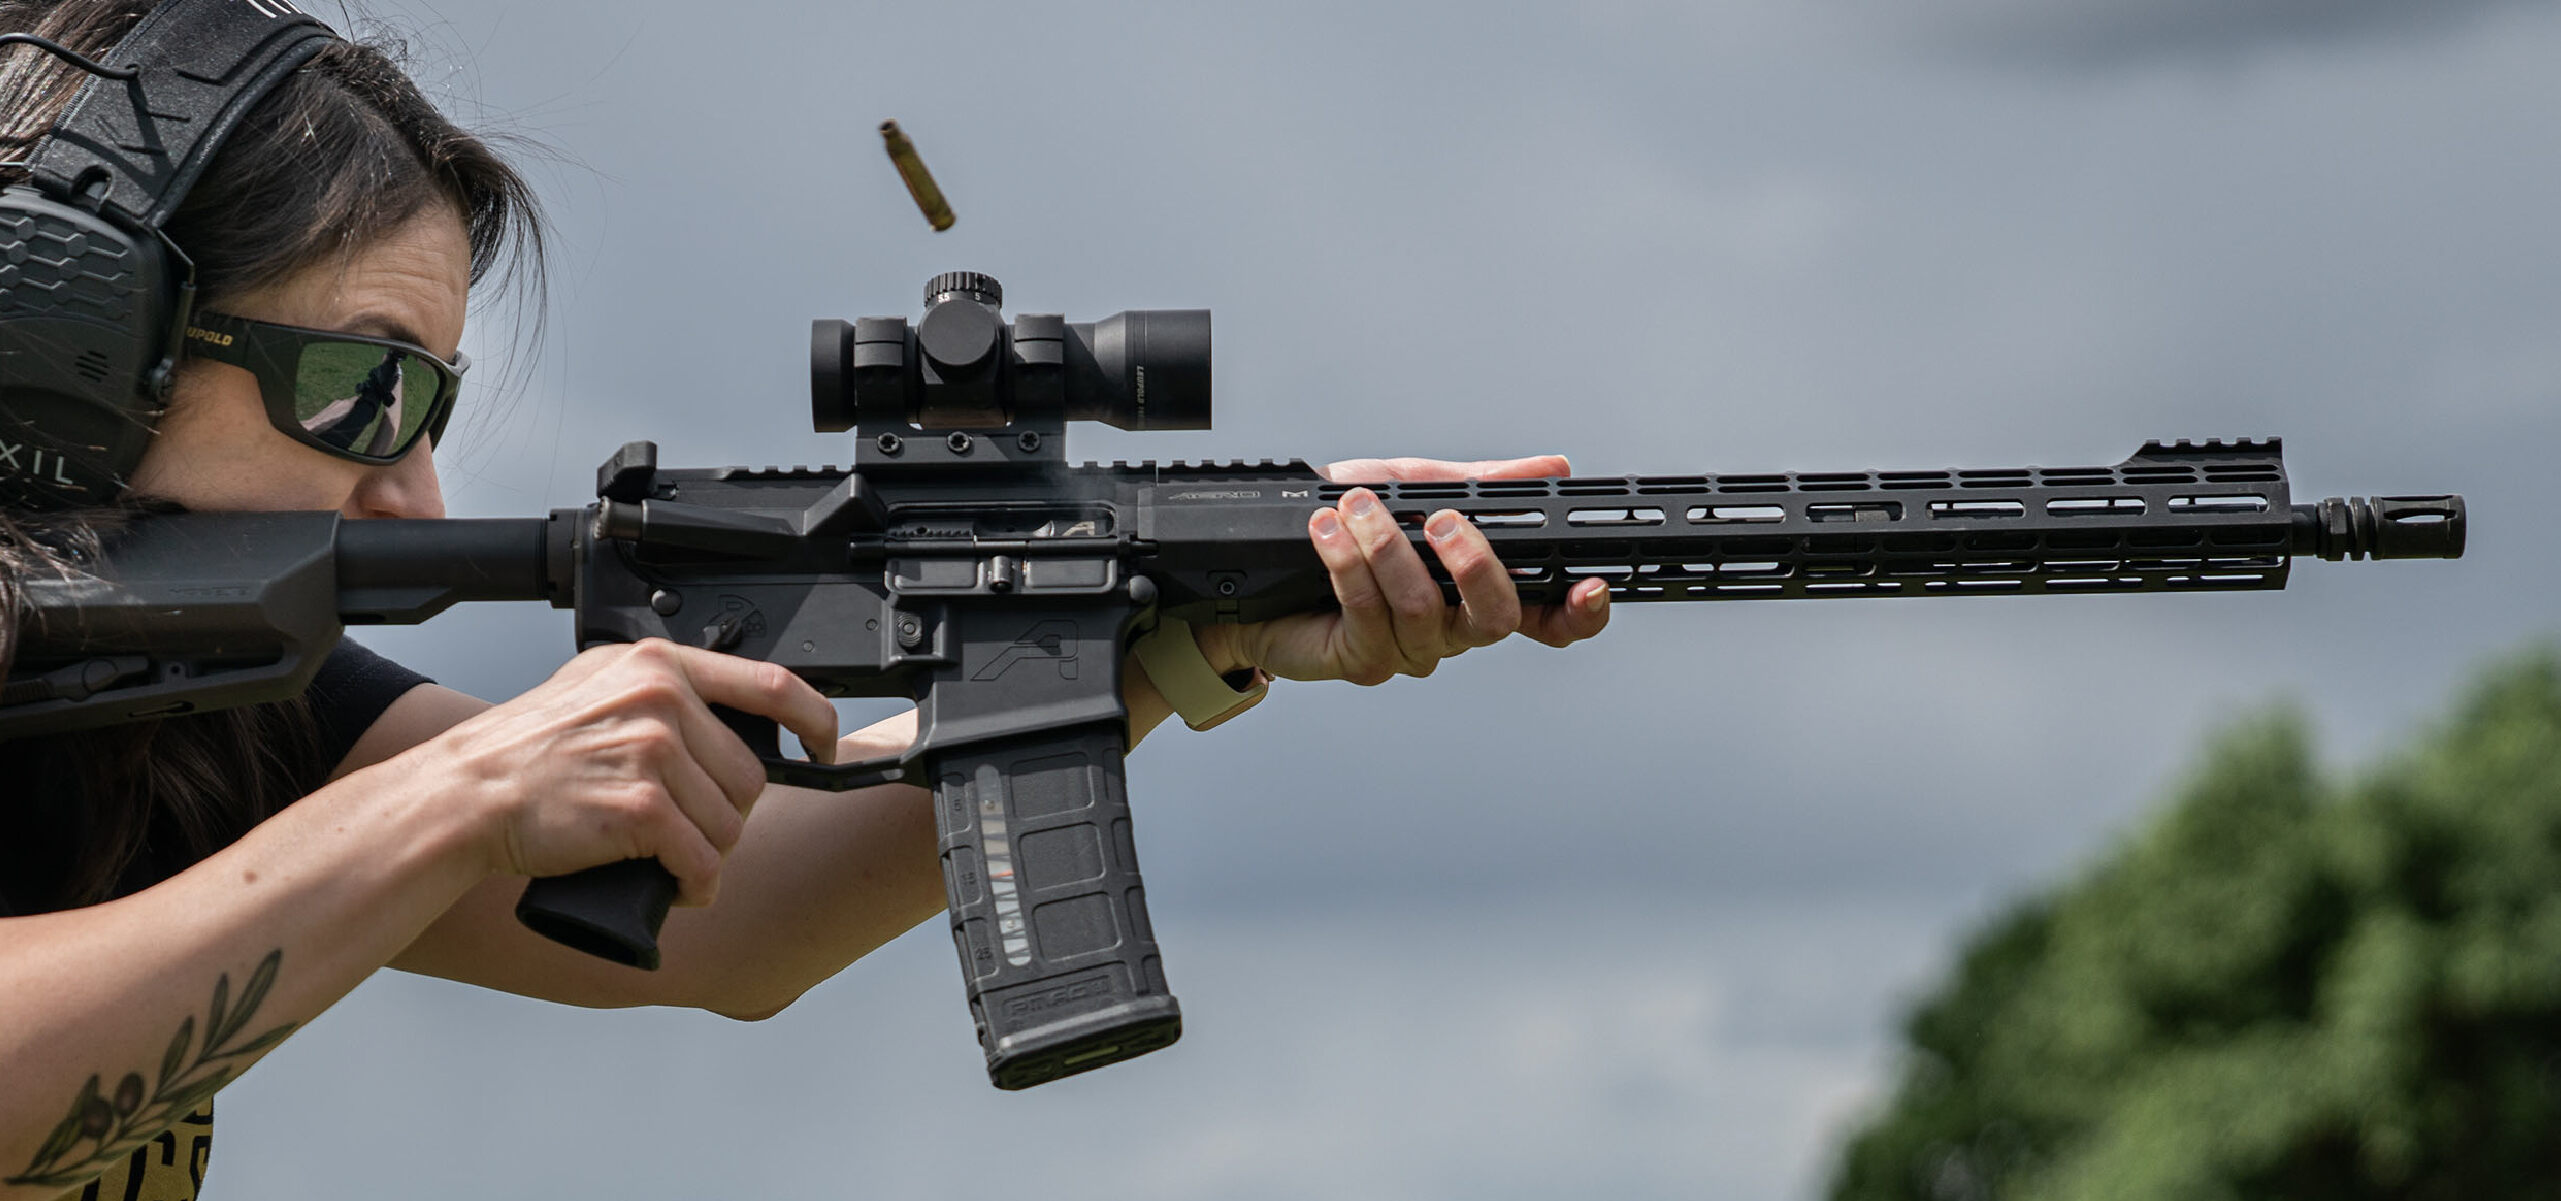 Person taking aim with a semi-automatic rifle with a Freedom Red Dot Sight mounted on top.